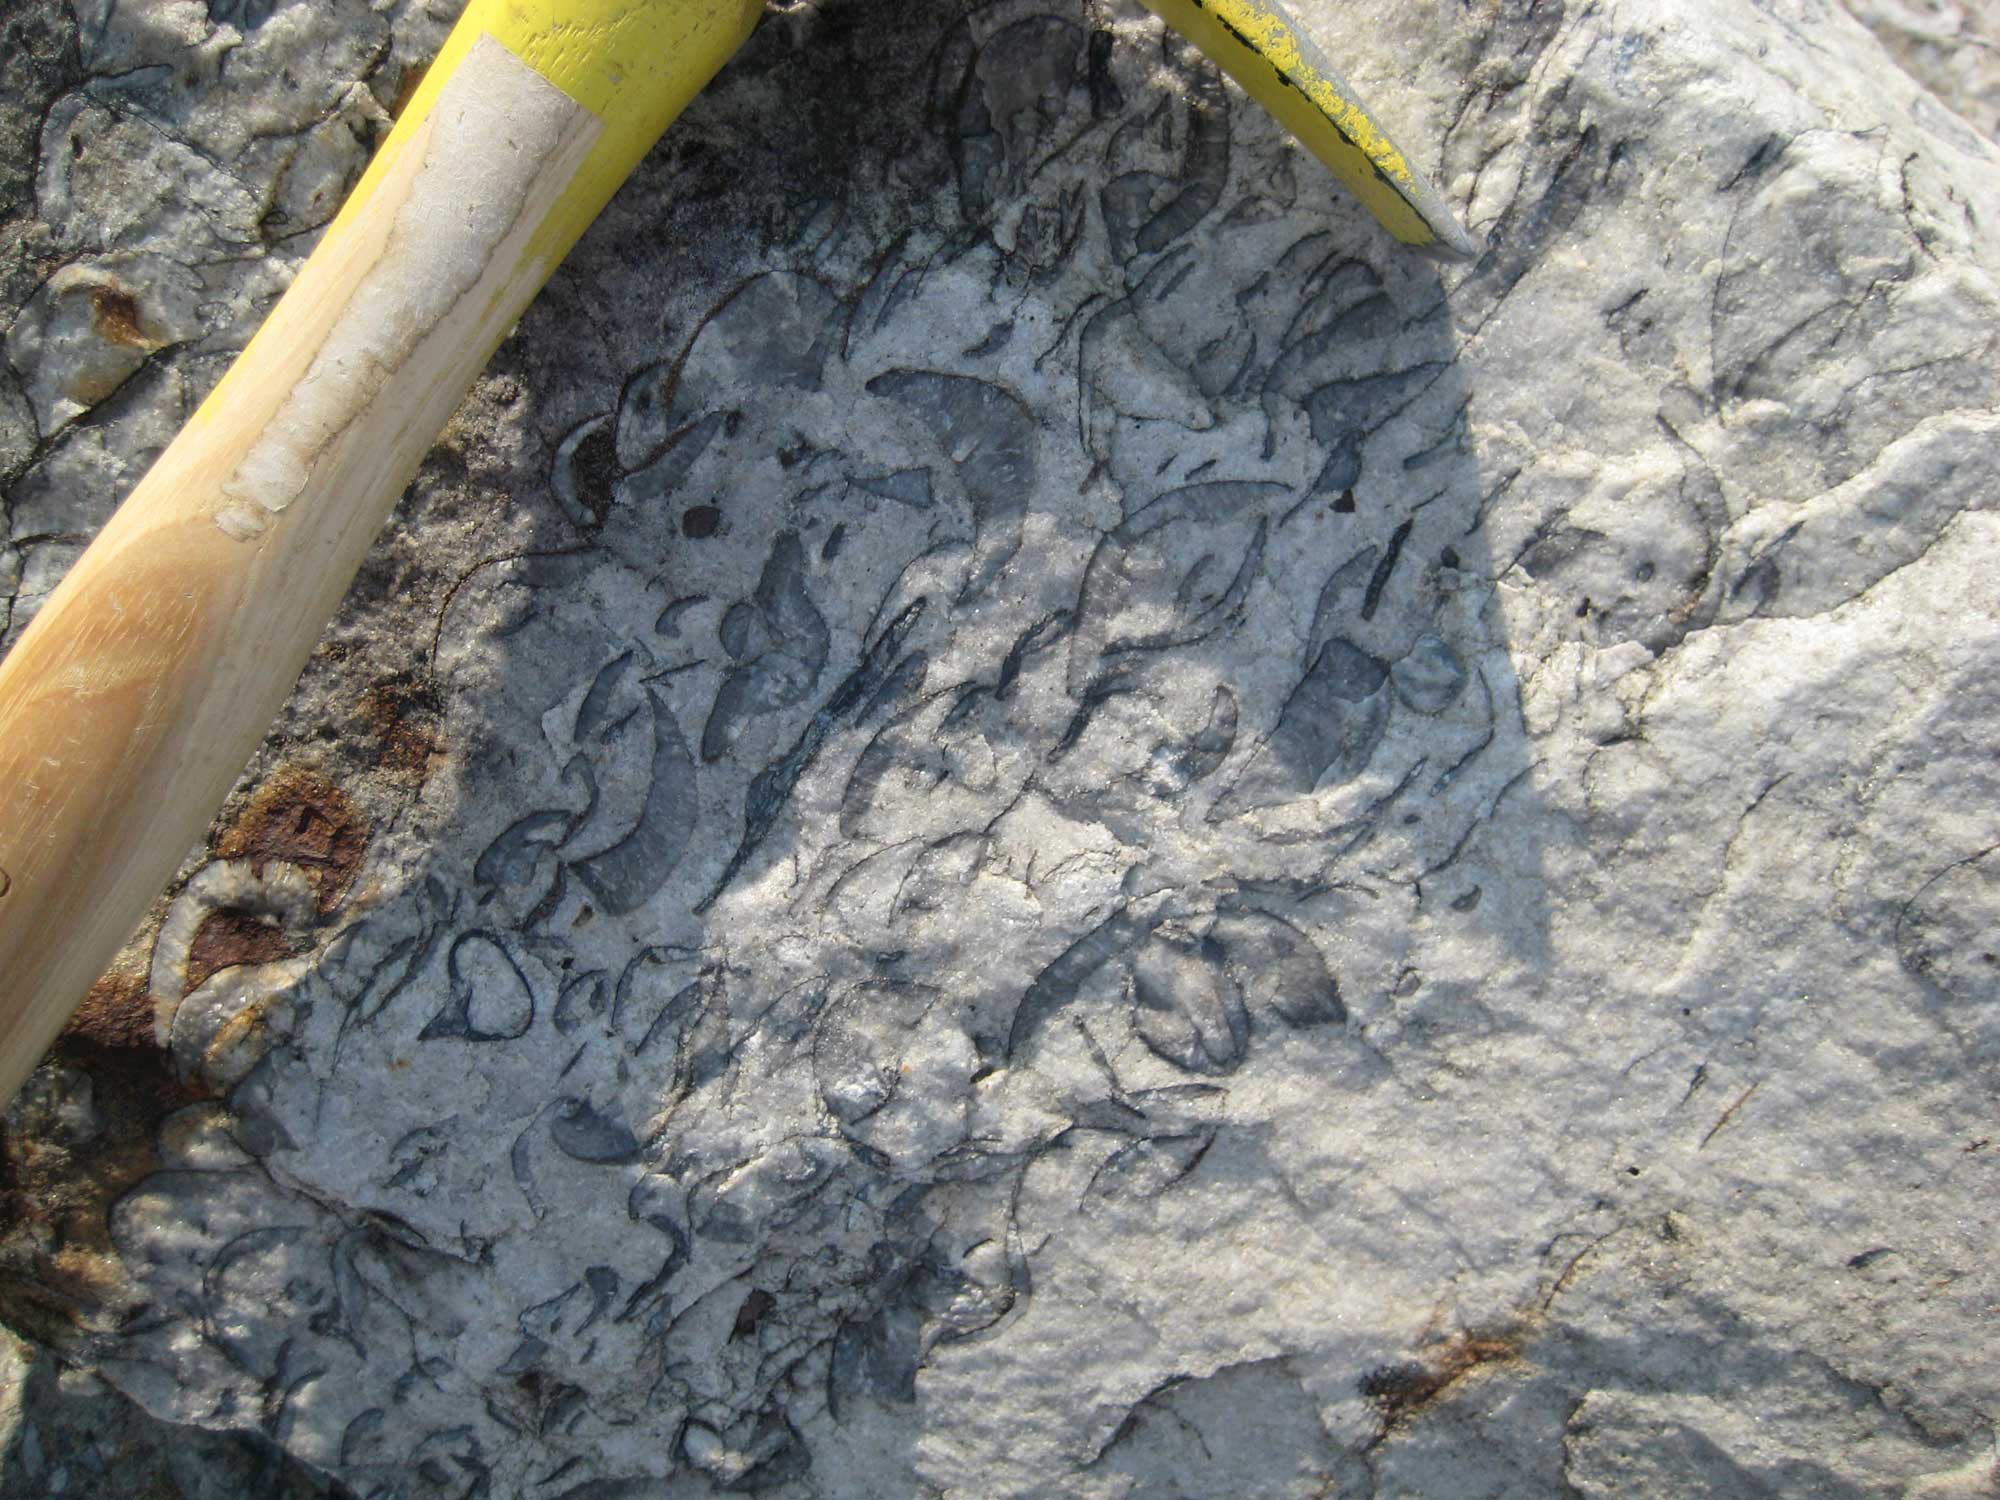 Photograph of Oriskany Sandstone from New York. The photo shows a nearly white sandstone with gray brachiopod shells shown in section. A rock hammer with a yellow head and wooden handle sits on top of the rock (only part of the hammer can be seen in the image).